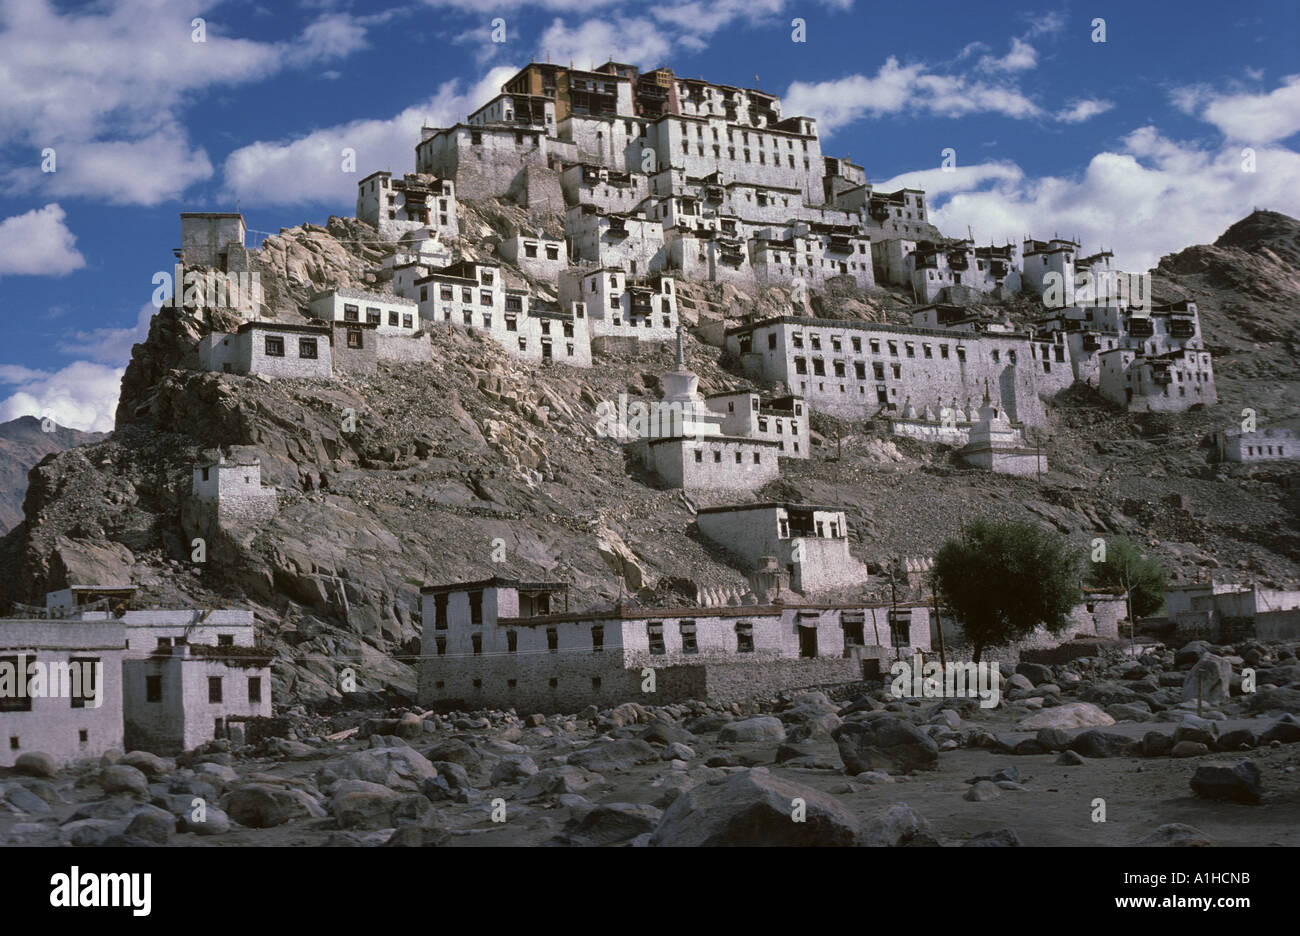 Thiksey Monastery Gompa south of Leh 600 years old 12 levels Ladakh India Asia Stock Photo